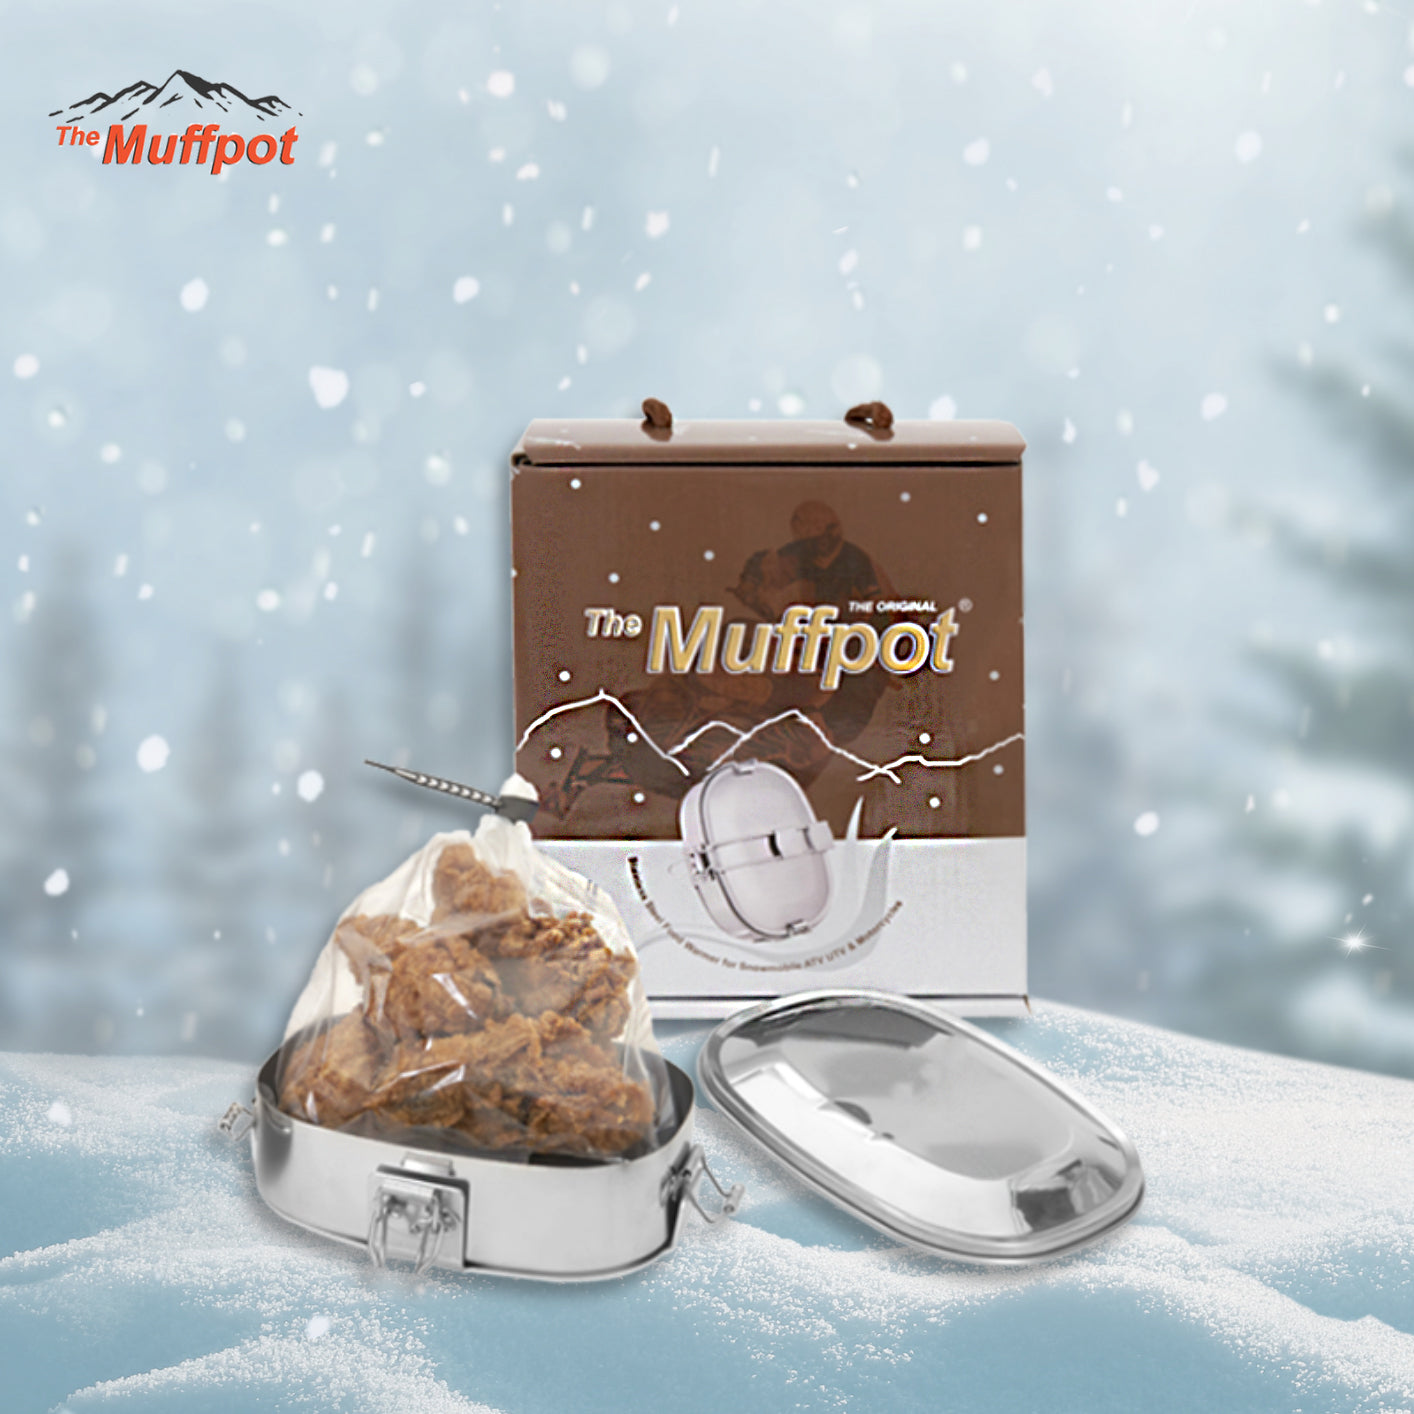 The Original Muffpot Exhaust Food Warmer for Motorsports vehicles. Snowmobile, ATV, UTV, and Motorcycles